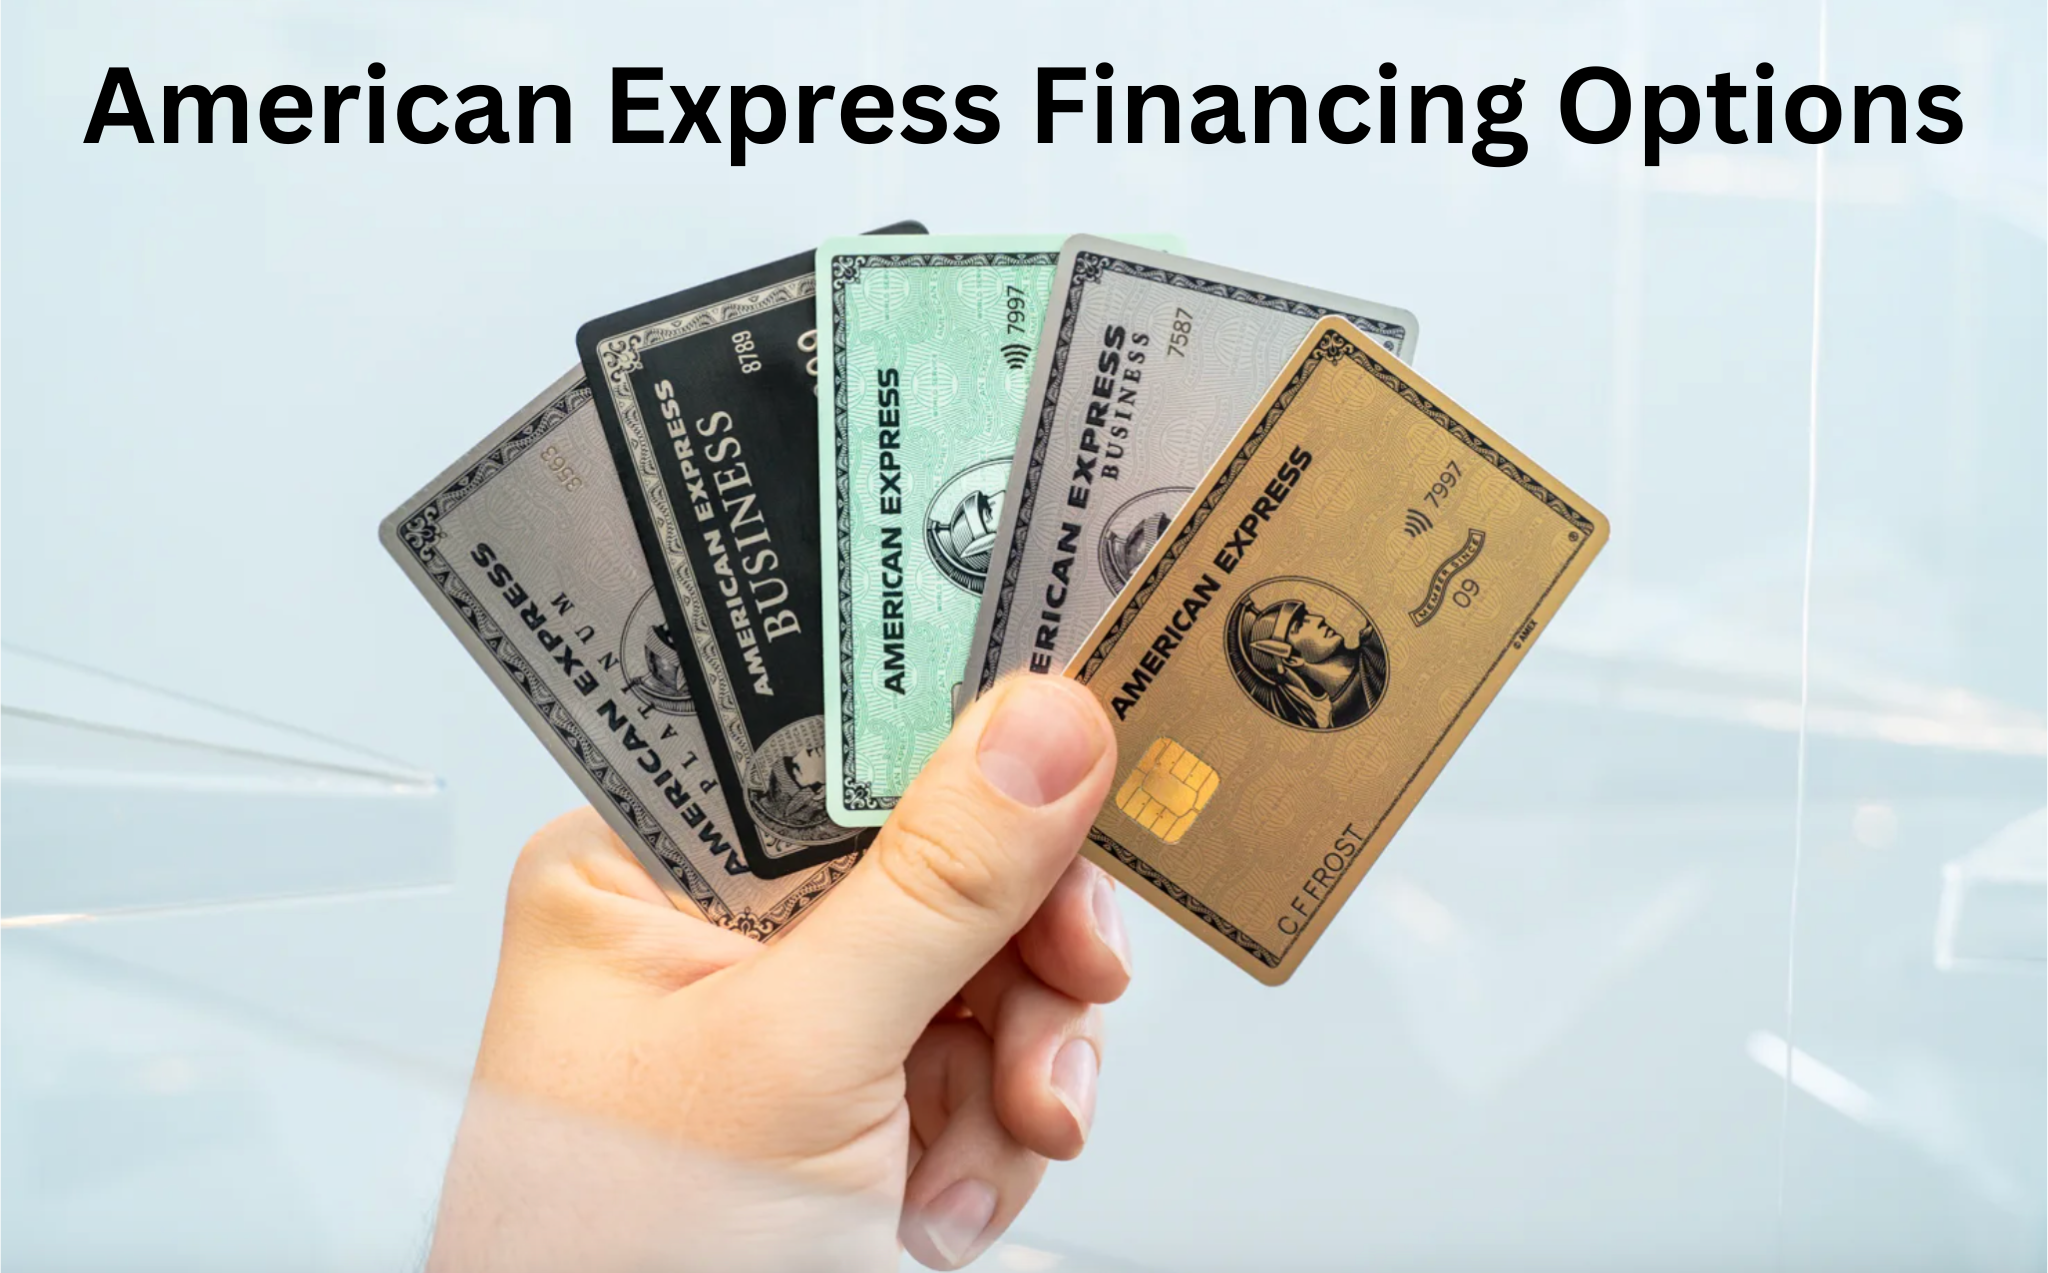 American Express Financing Options